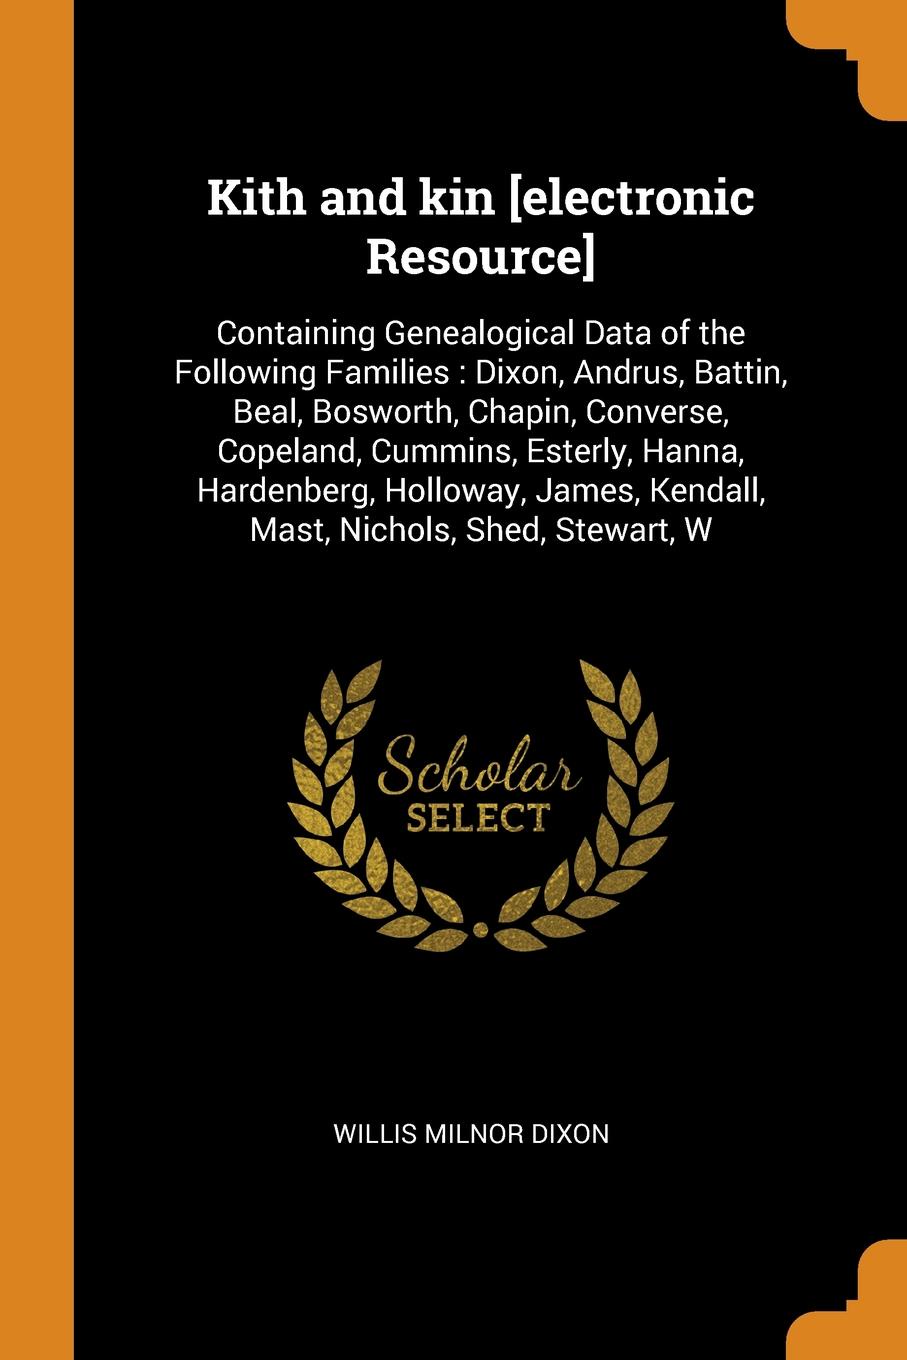 Kith and kin .electronic Resource.. Containing Genealogical Data of the Following Families : Dixon, Andrus, Battin, Beal, Bosworth, Chapin, Converse, Copeland, Cummins, Esterly, Hanna, Hardenberg, Holloway, James, Kendall, Mast, Nichols, Shed, Ste...